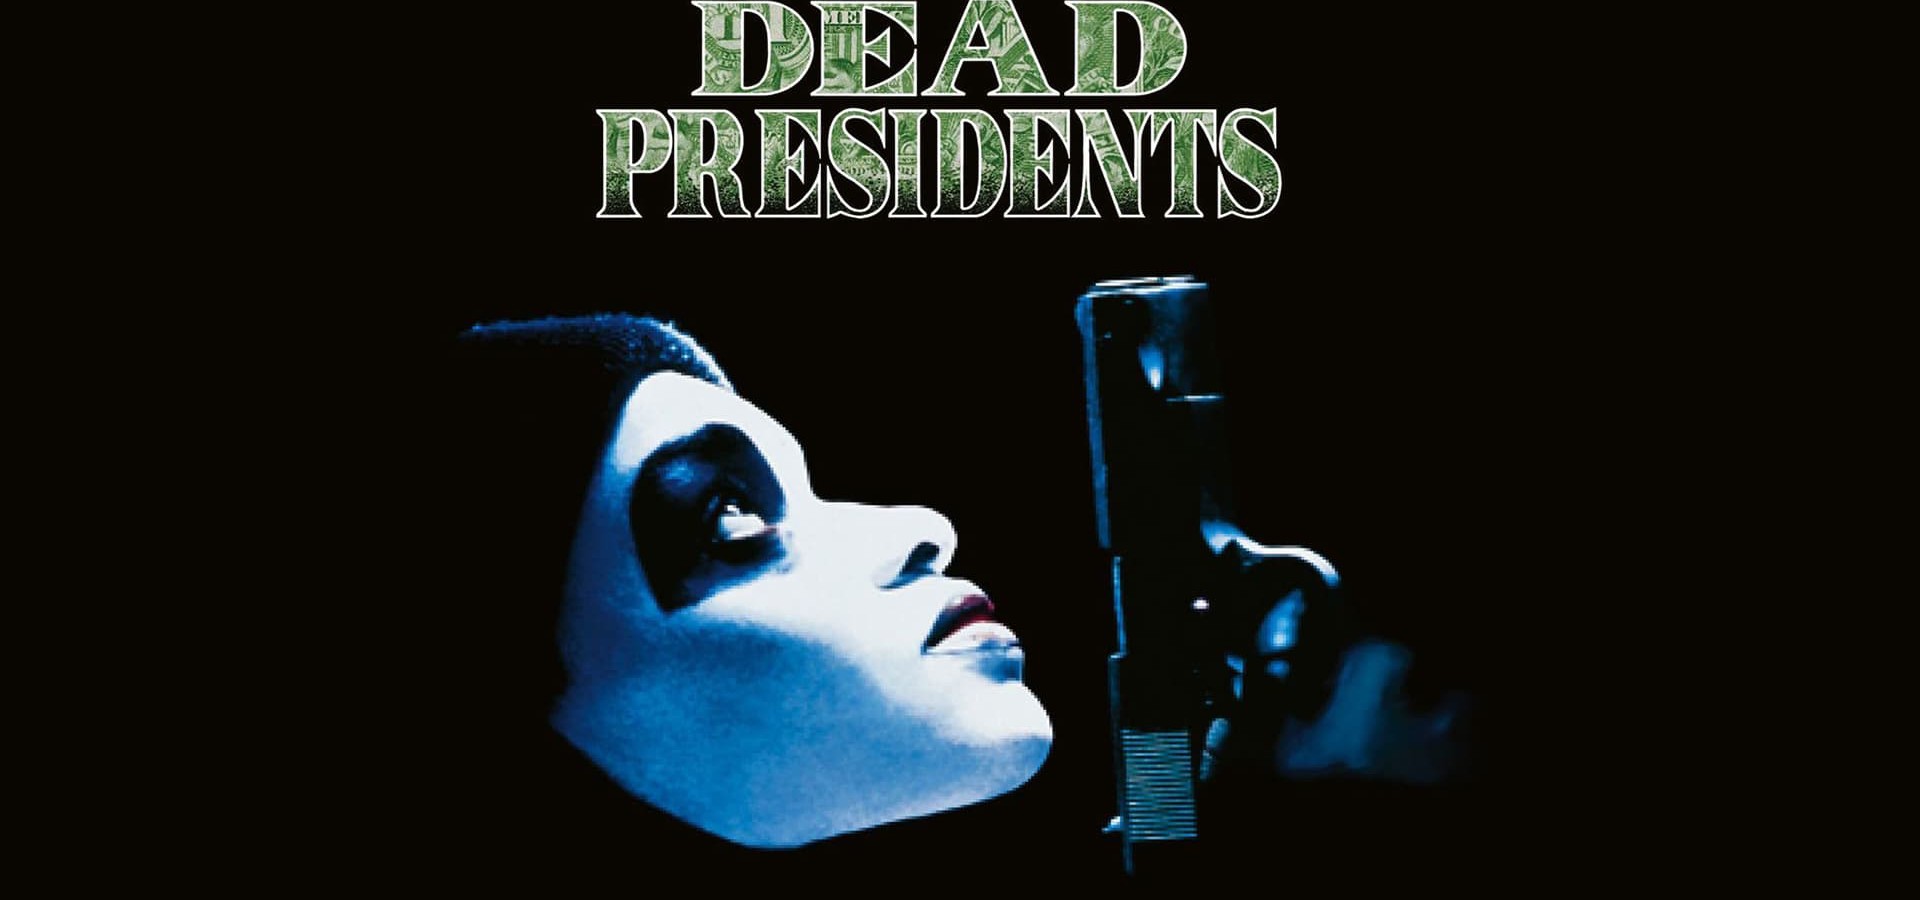 Dead Presidents streaming: where to watch online?